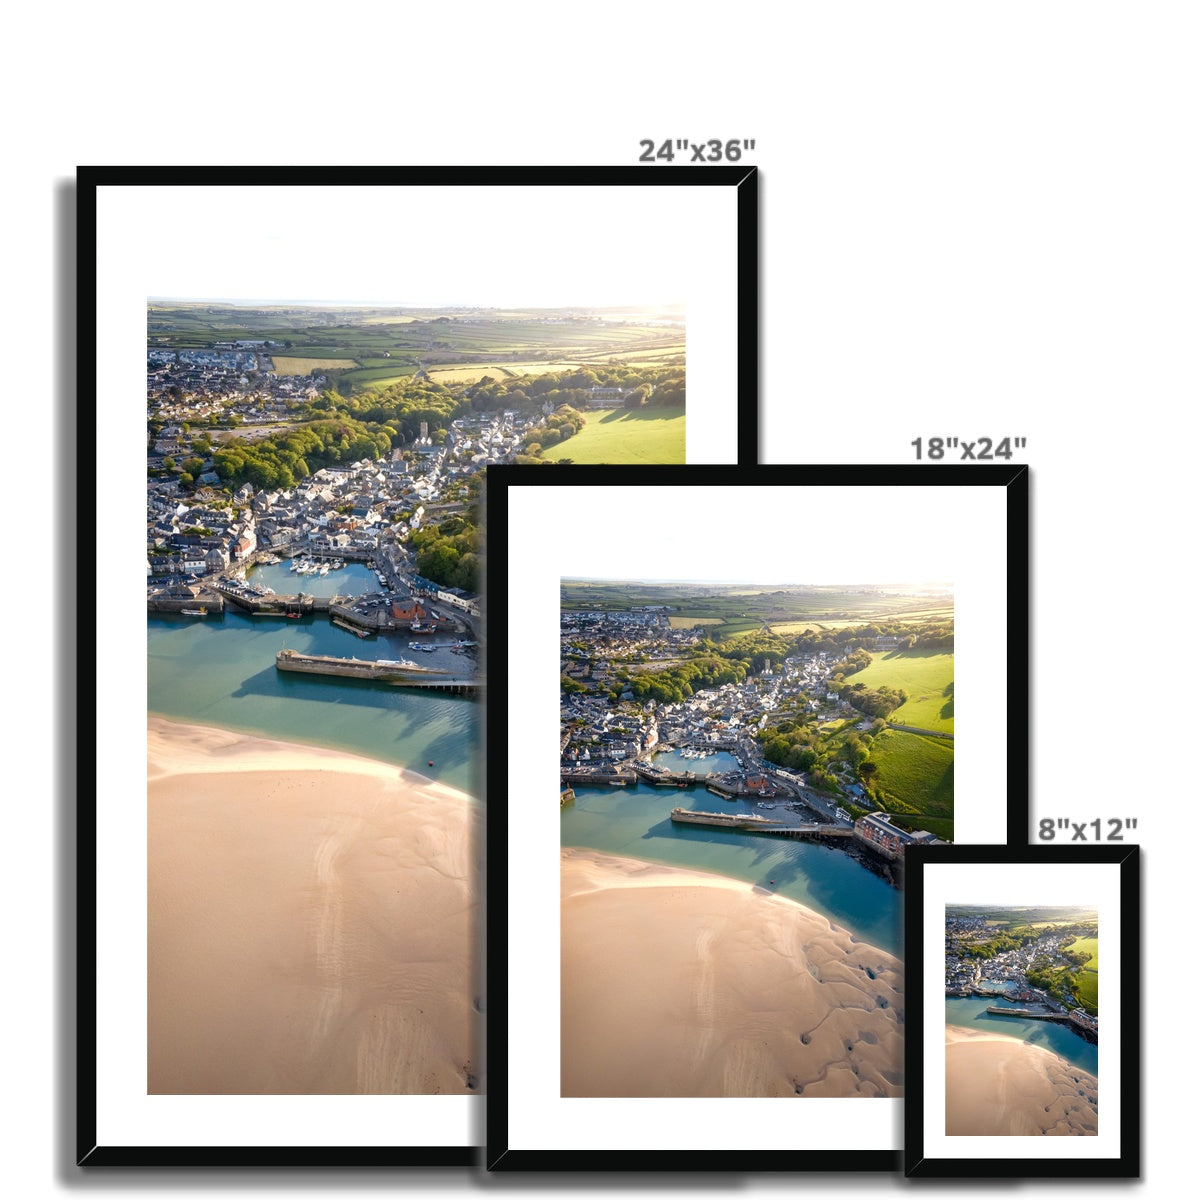 padstow frame sizes